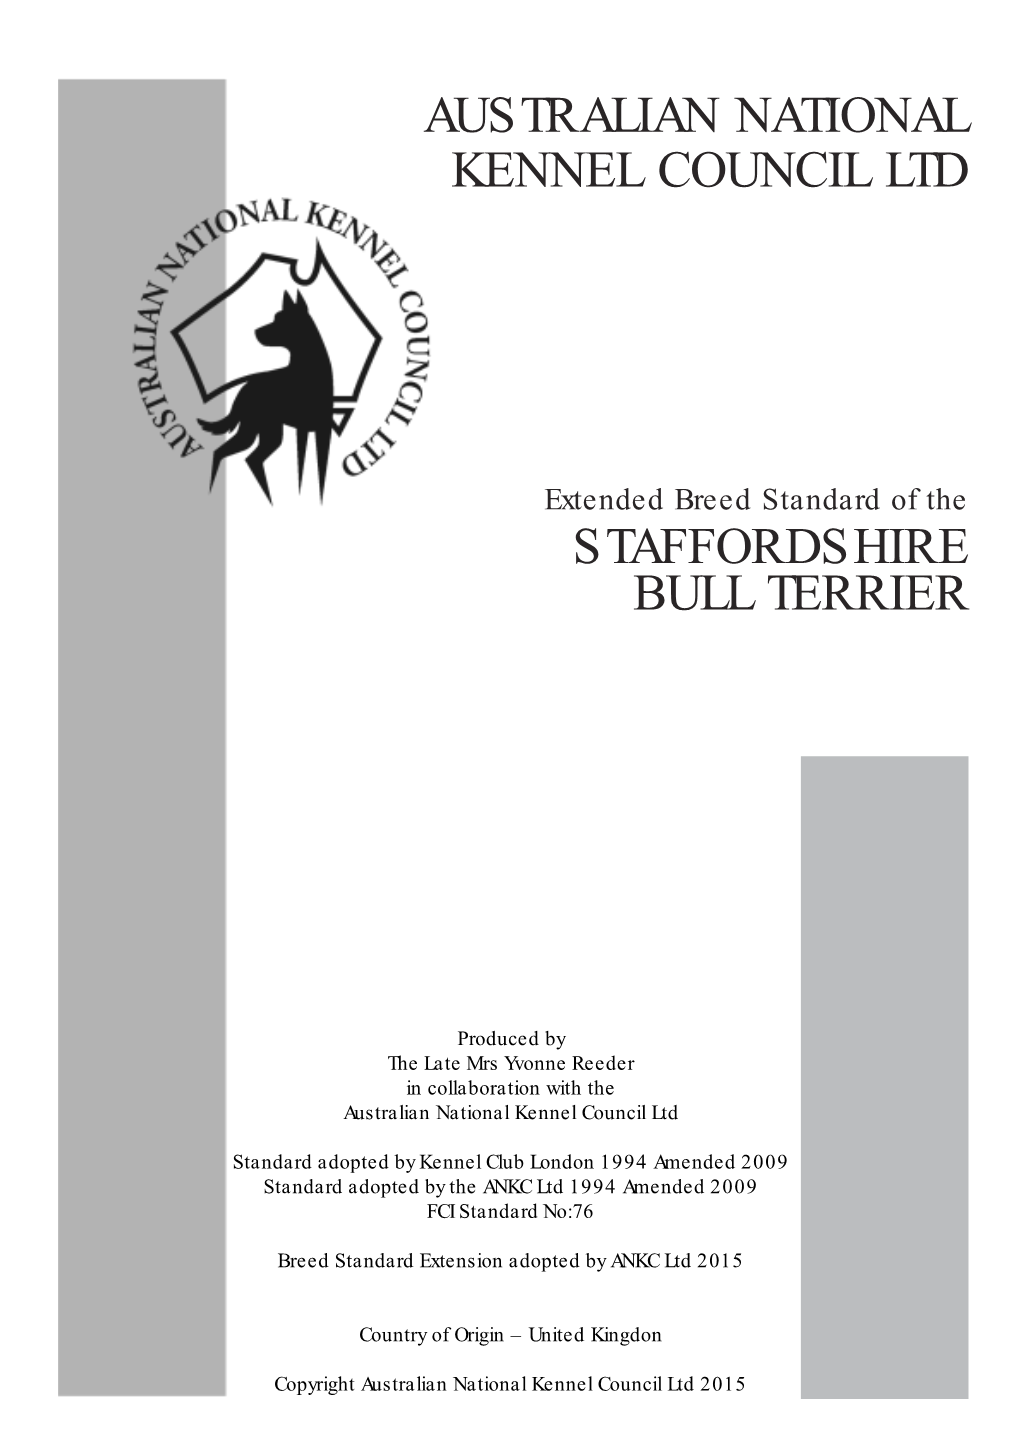 Extended Breed Standard of the STAFFORDSHIRE BULL TERRIER